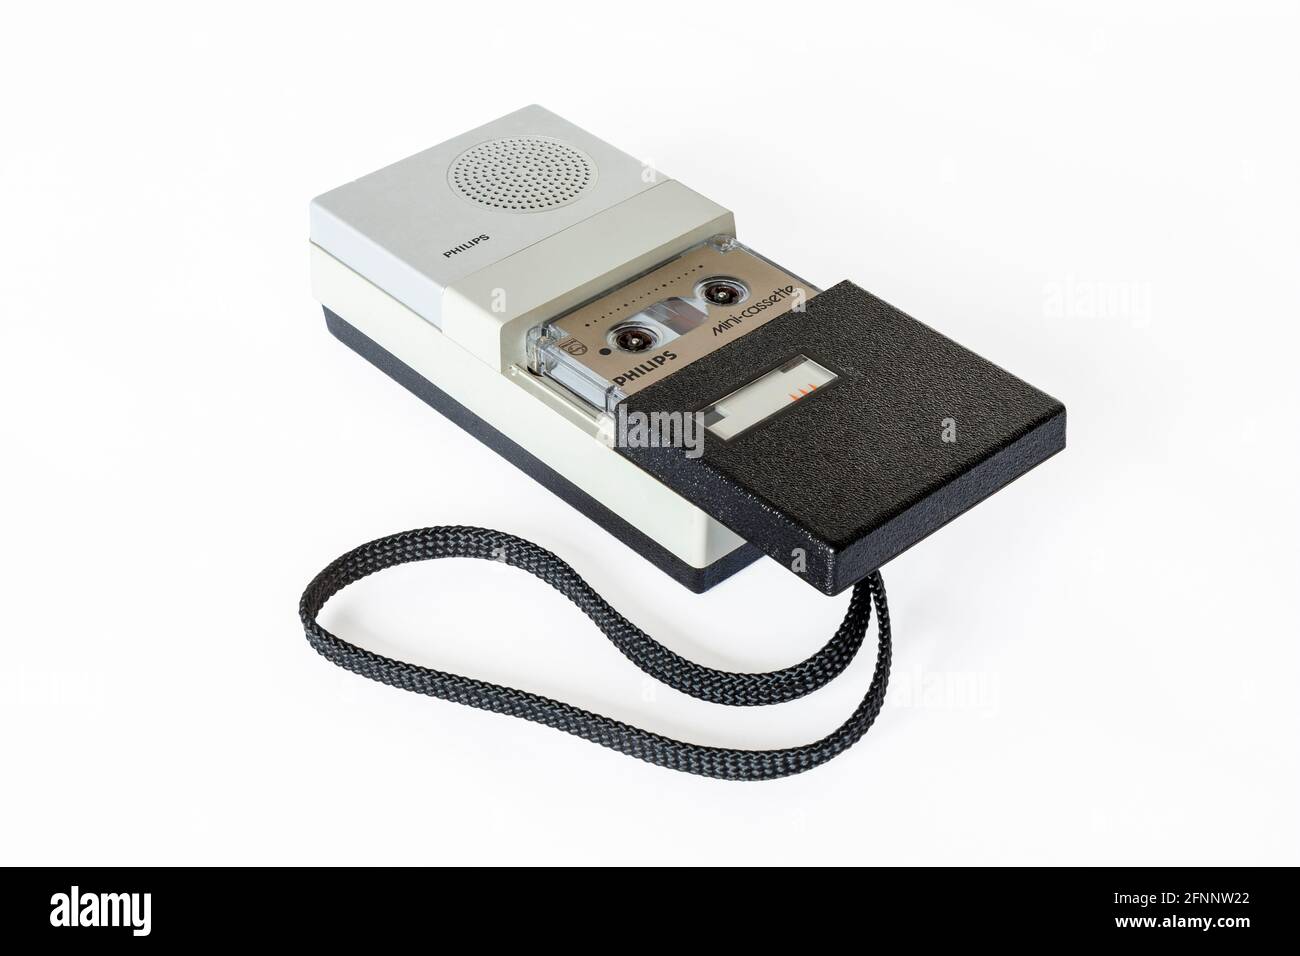 https://c8.alamy.com/comp/2FNNW22/philips-lfh-0085-15-pocket-memo-a-1980s-handheld-dictaphone-the-tray-open-to-show-the-mini-cassette-on-a-white-background-2FNNW22.jpg